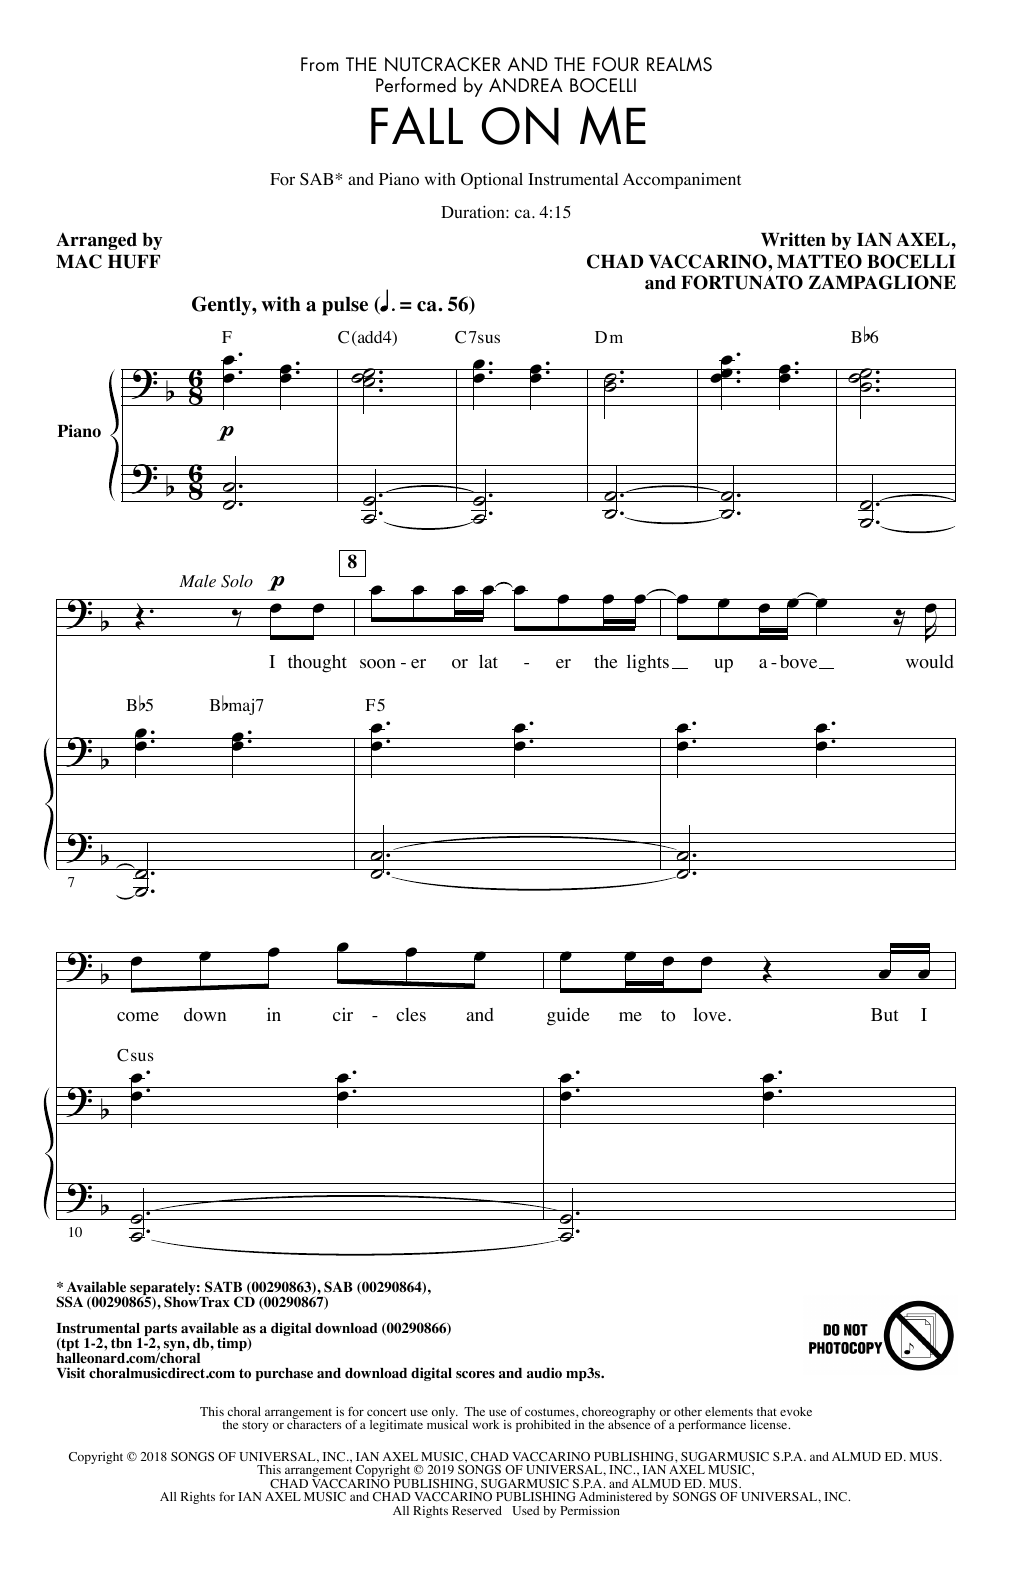 Download Andrea Bocelli & Matteo Bocelli Fall On Me (from The Nutcracker and the Sheet Music